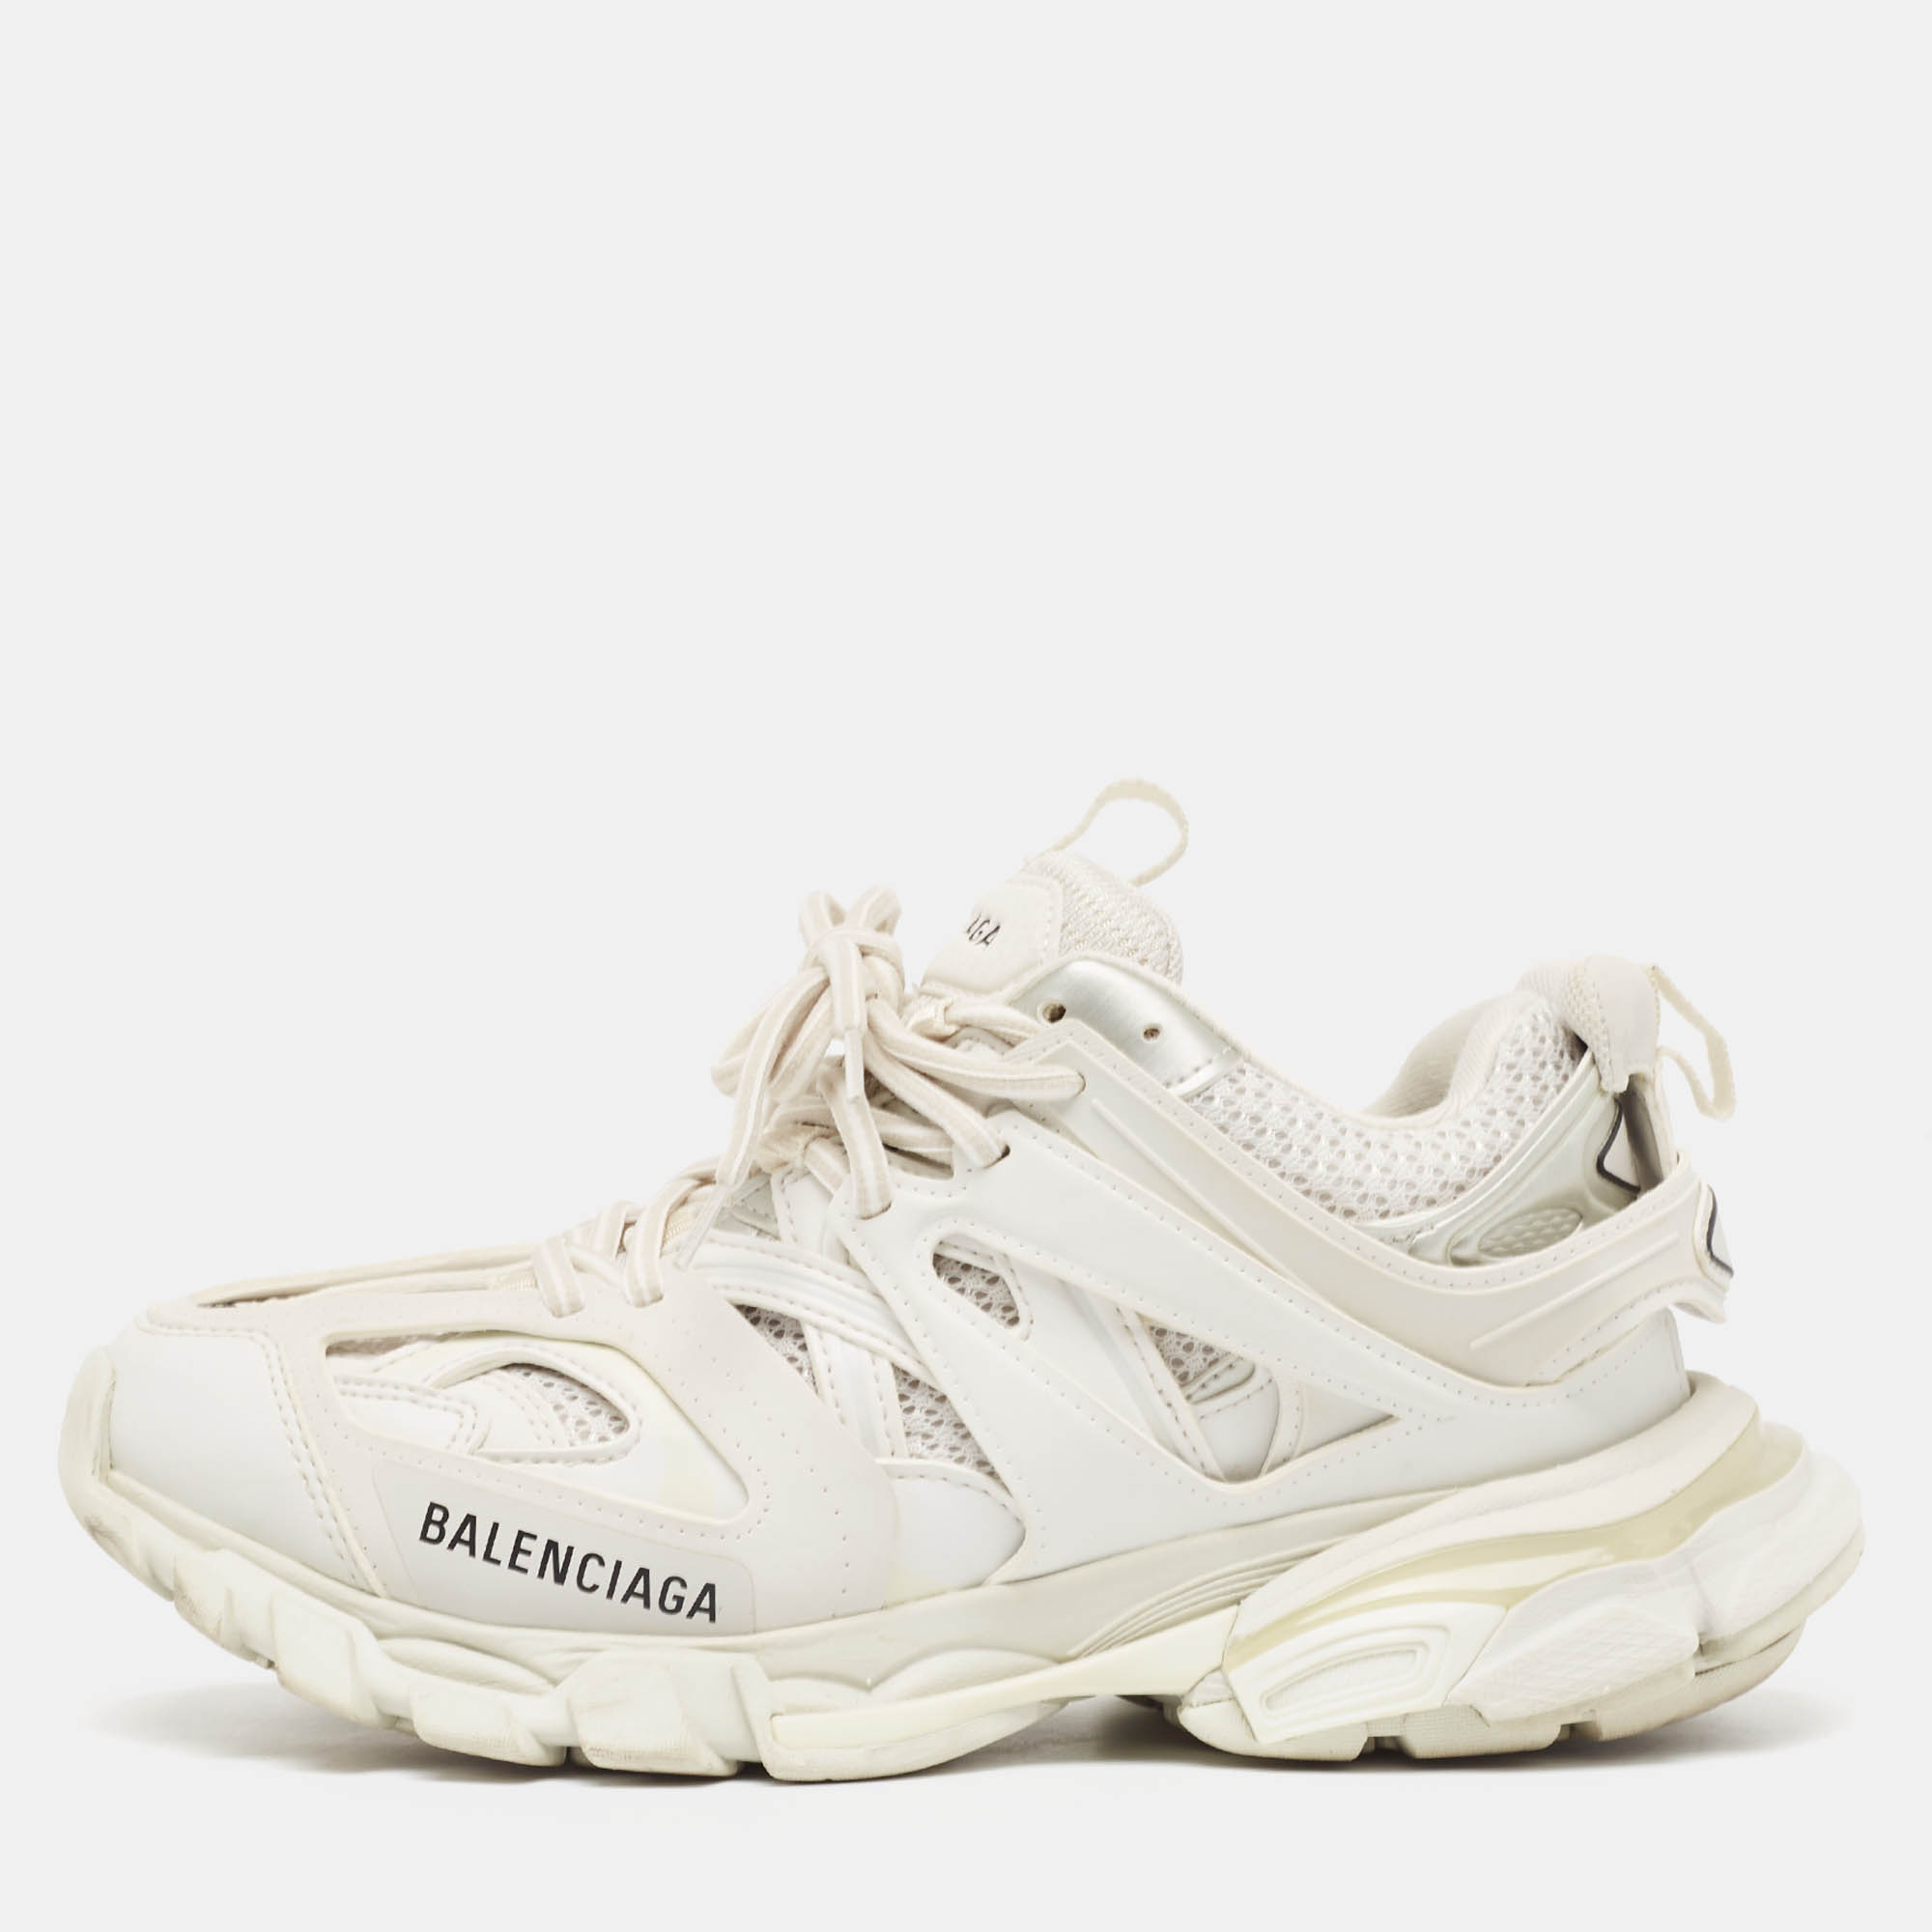 Balenciaga white leather and mesh track sneakers size 37